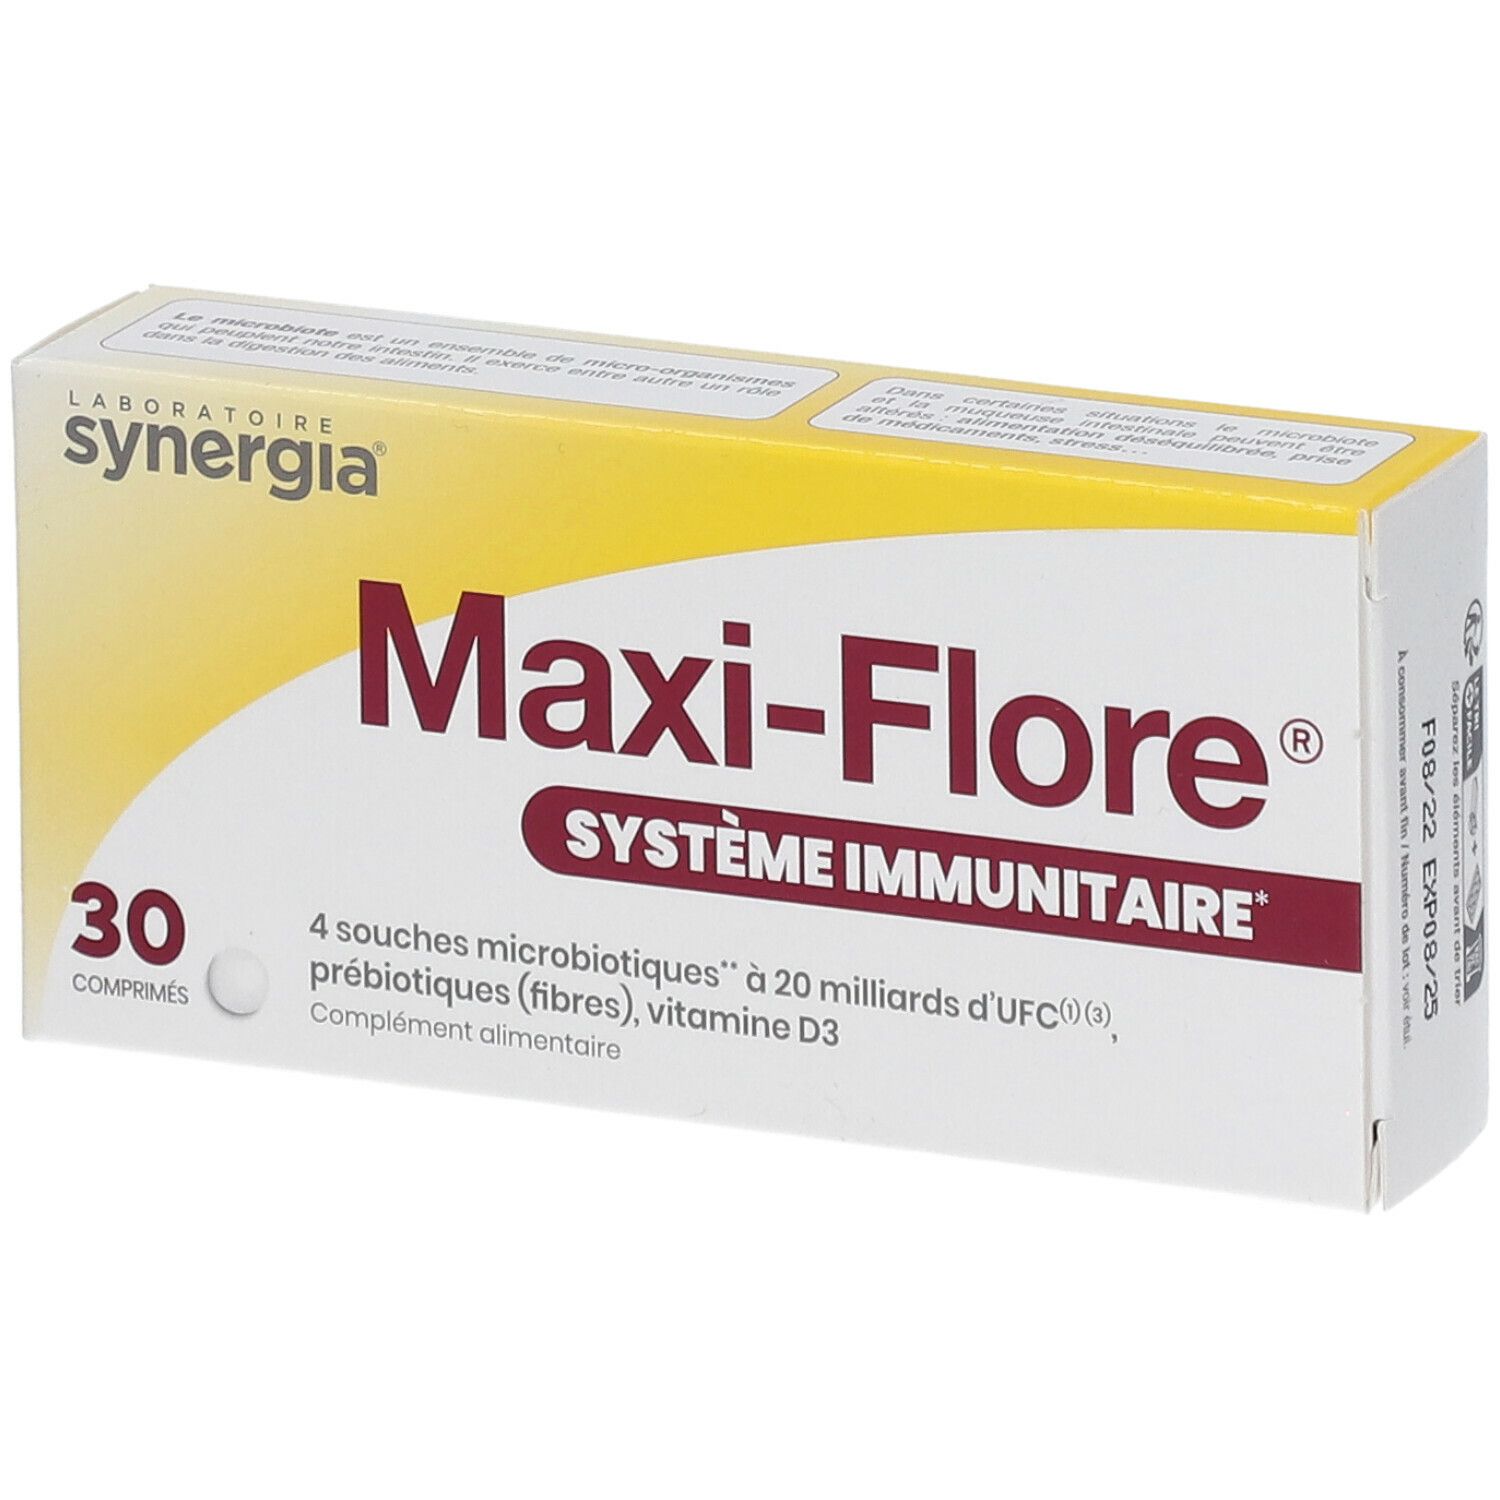 Image of Synergia Maxi-Flore®